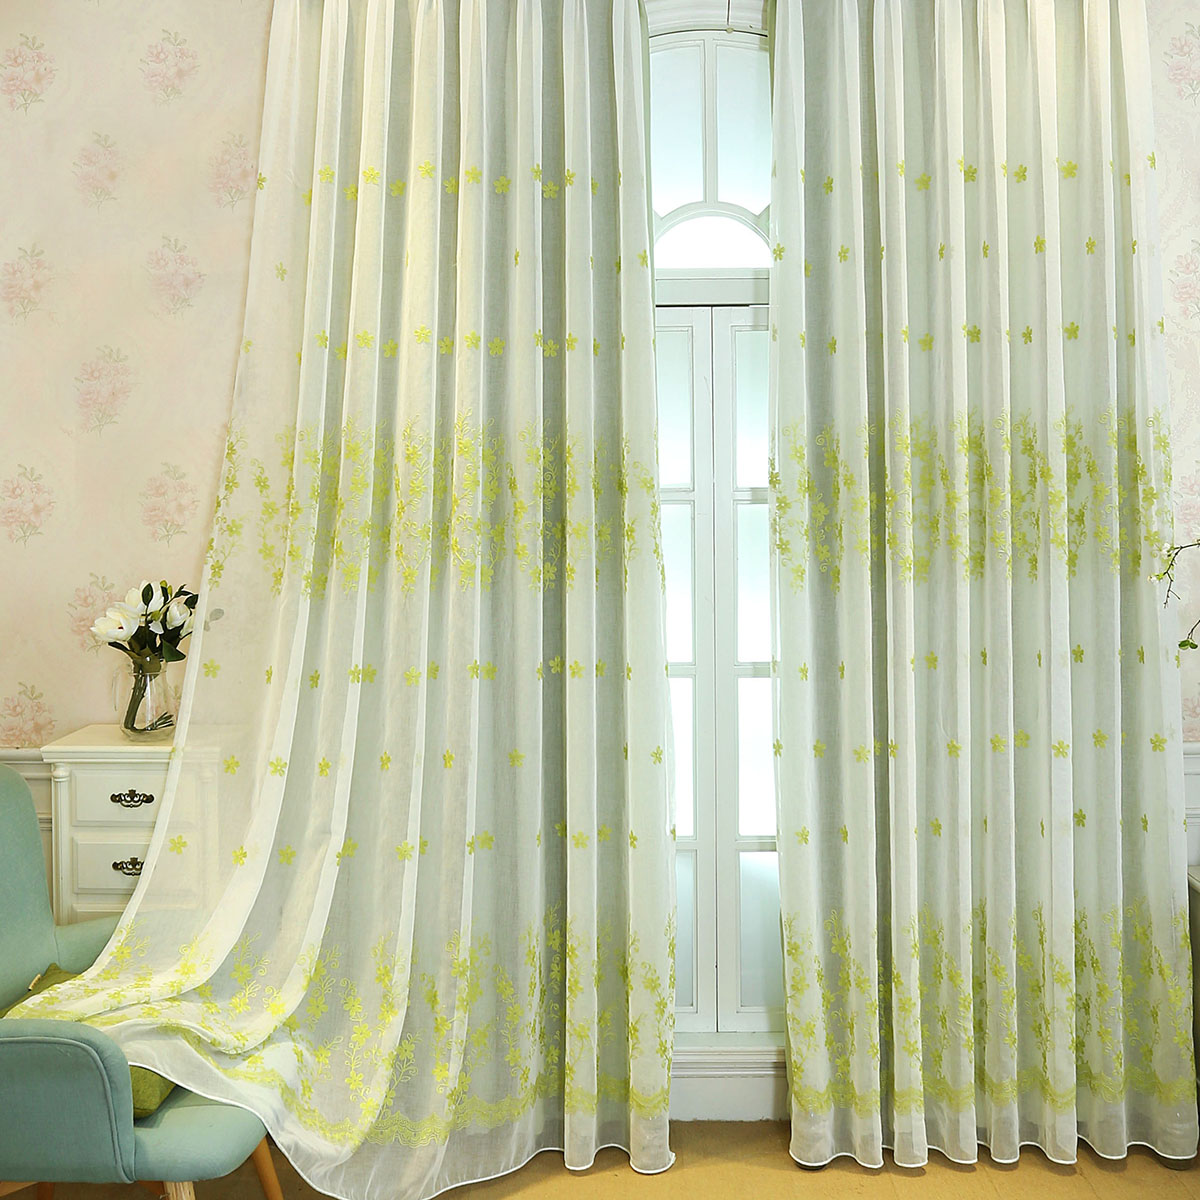 Green lined voile curtains